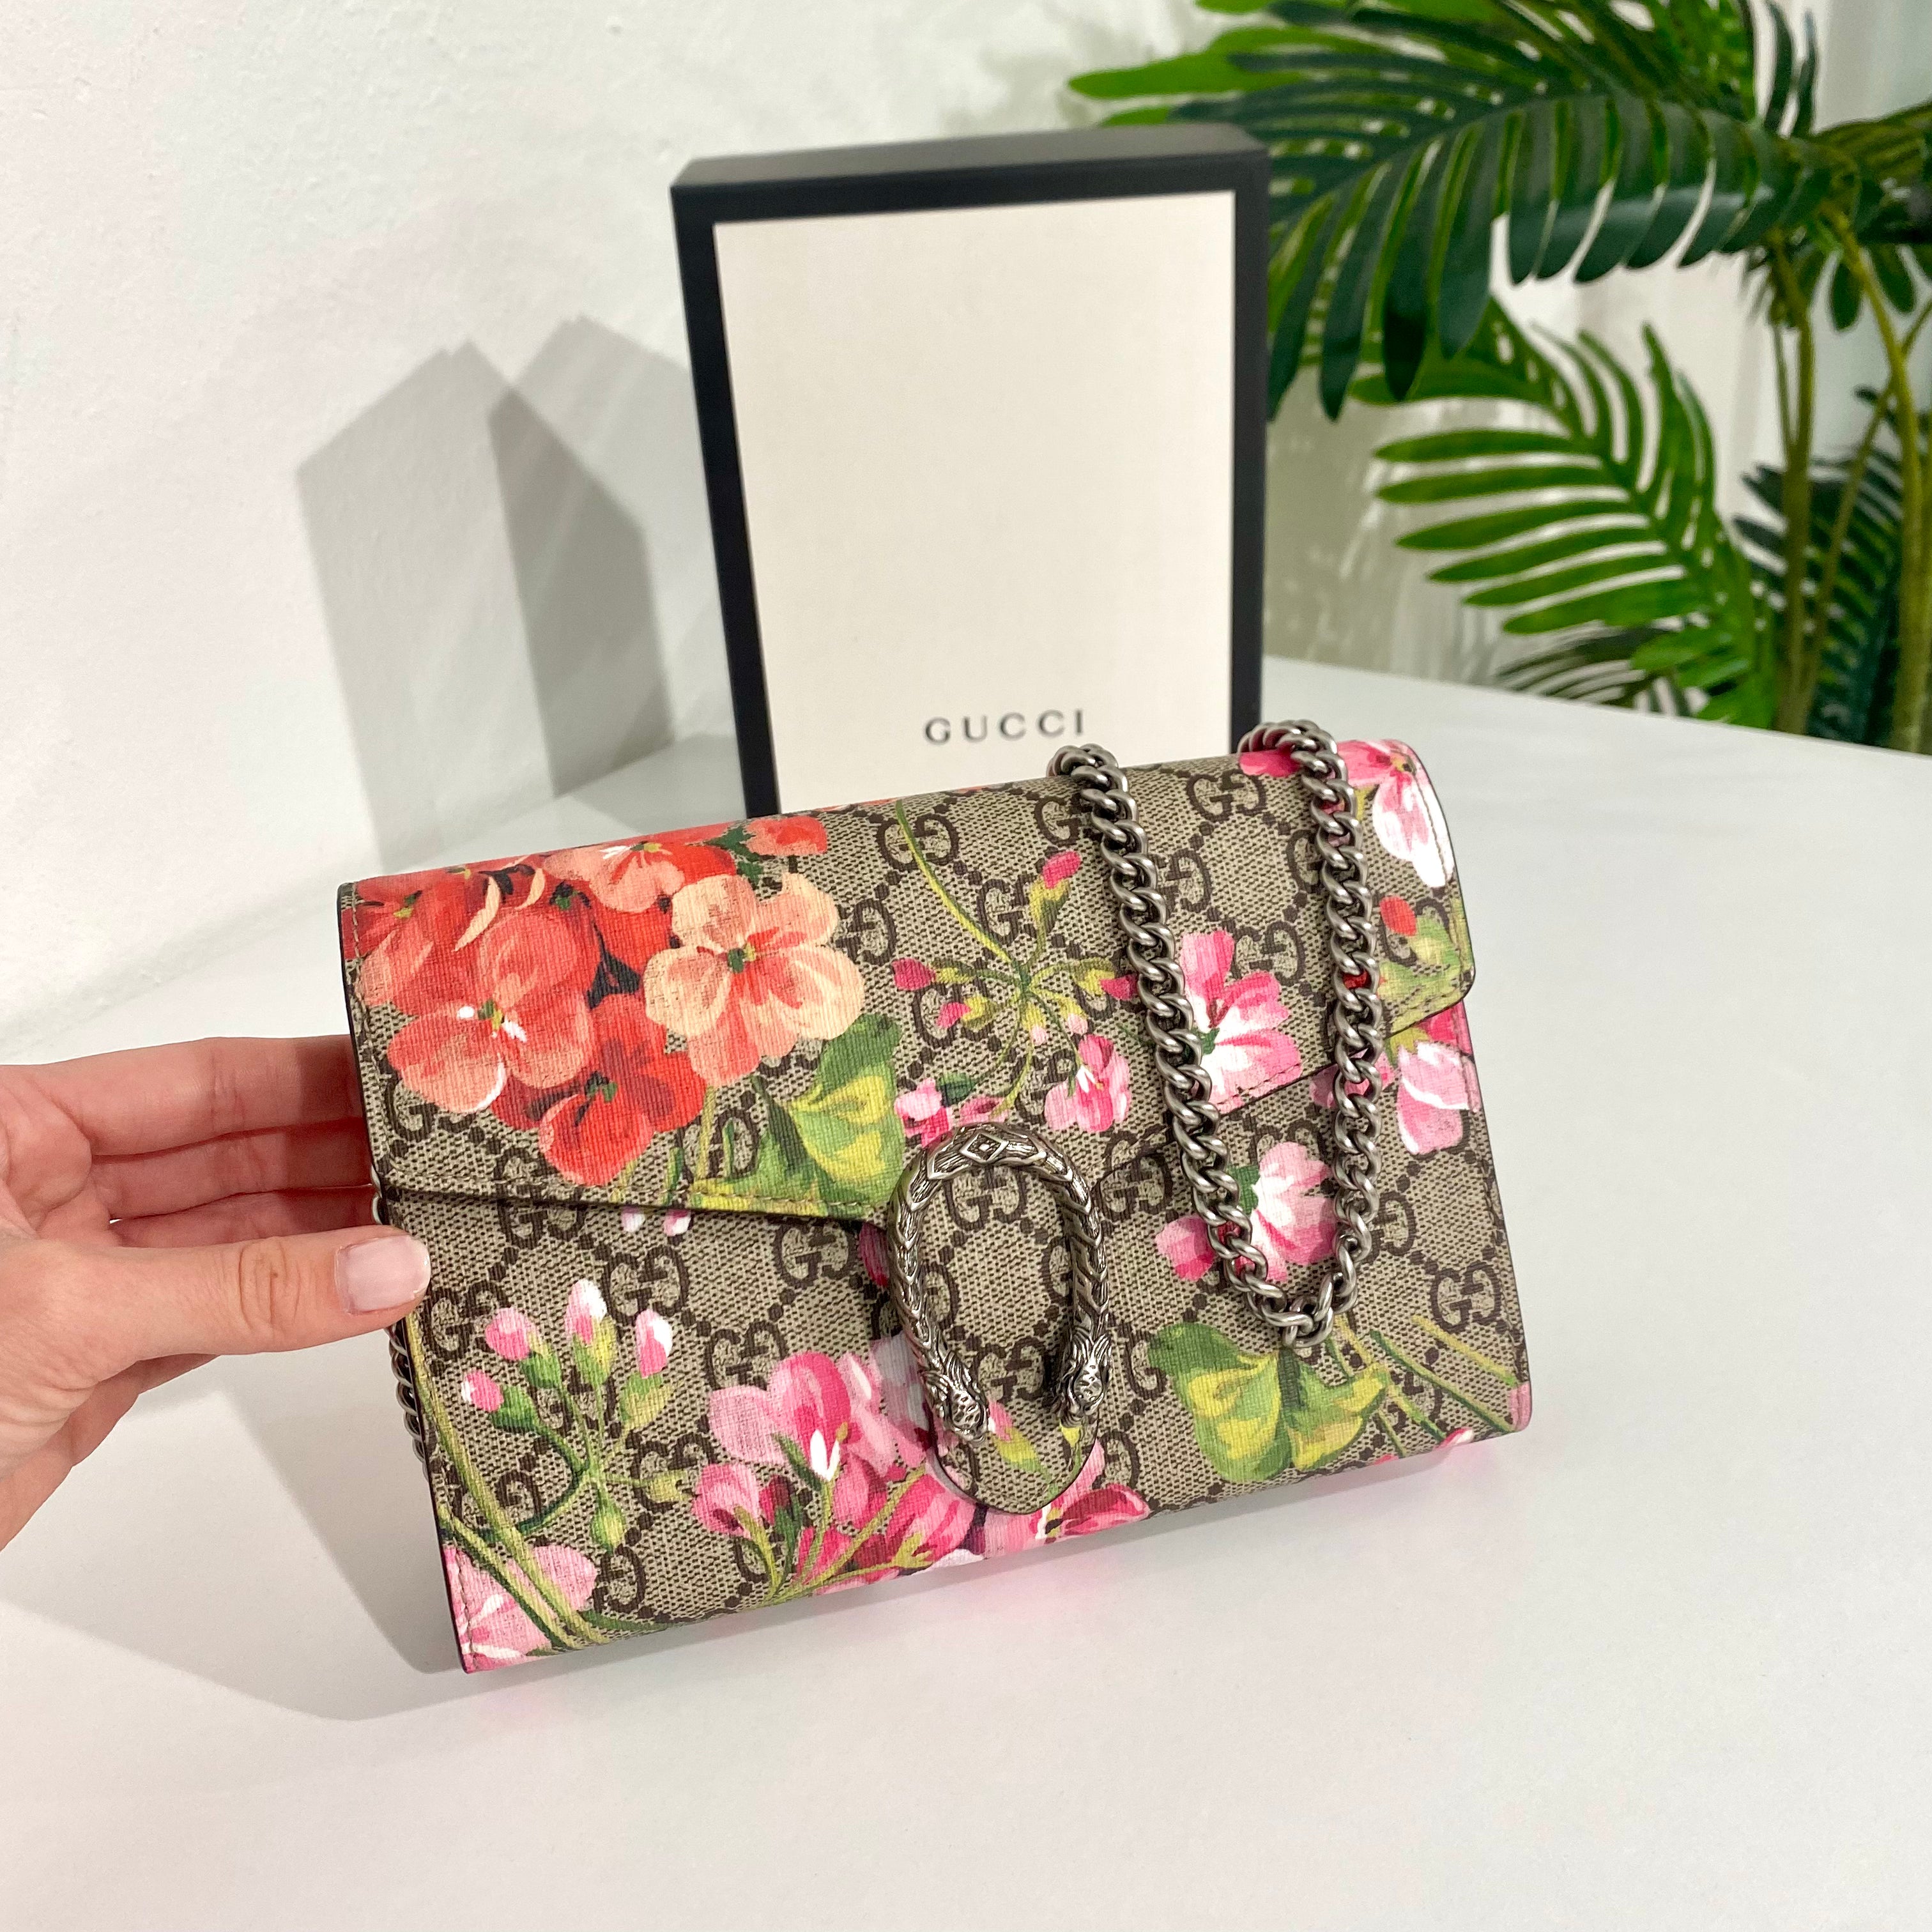 Gucci Dionysus WOC wallet of chain flower printing original leather version